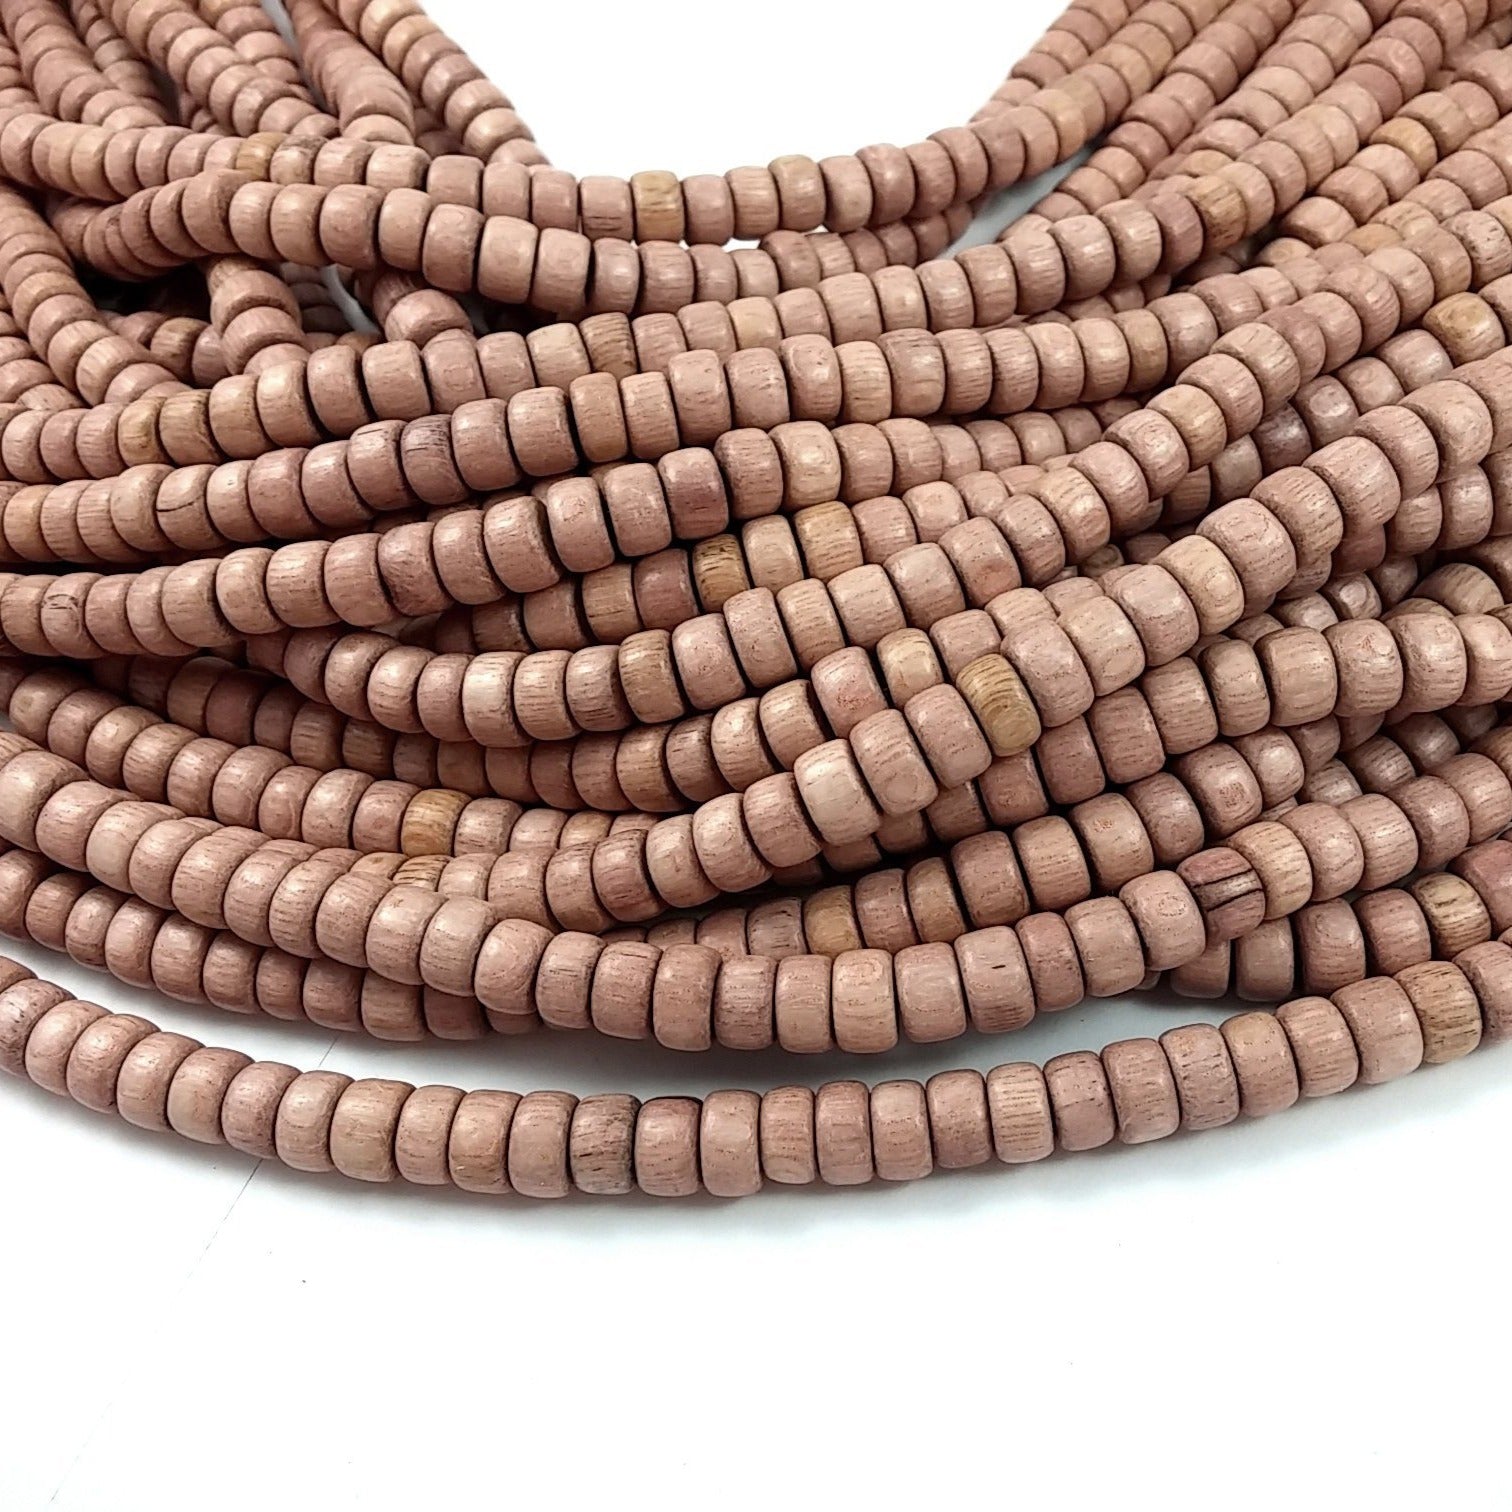 Rosewood beads 8mm - Natural Mala Wooden Beads - Rondelle